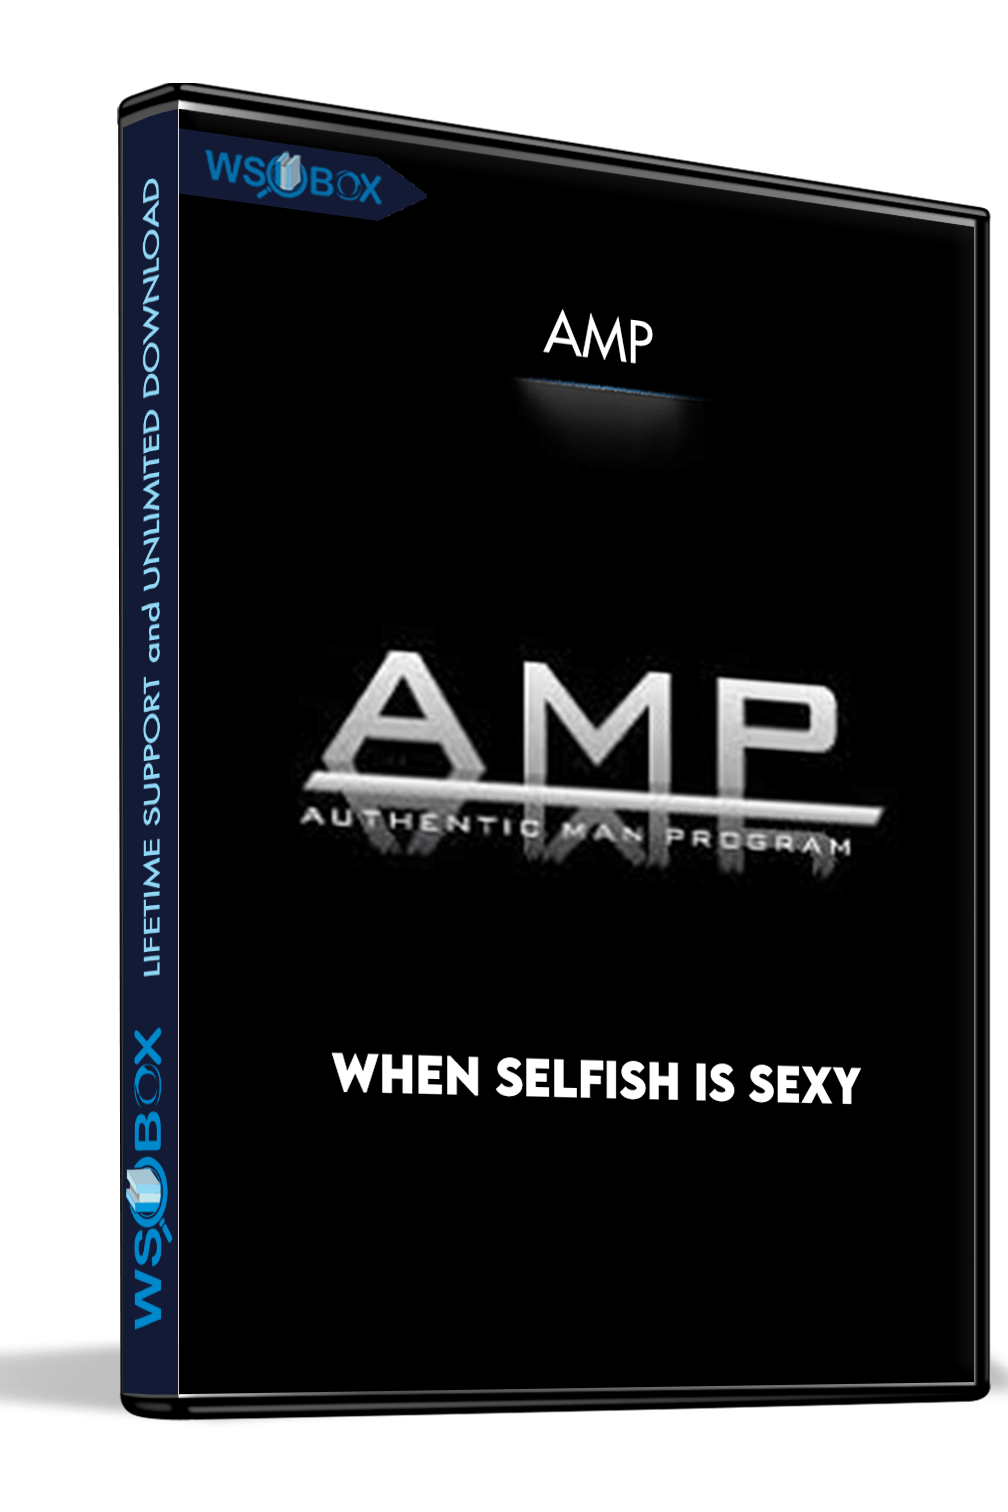 when-selfish-is-sexy-amp